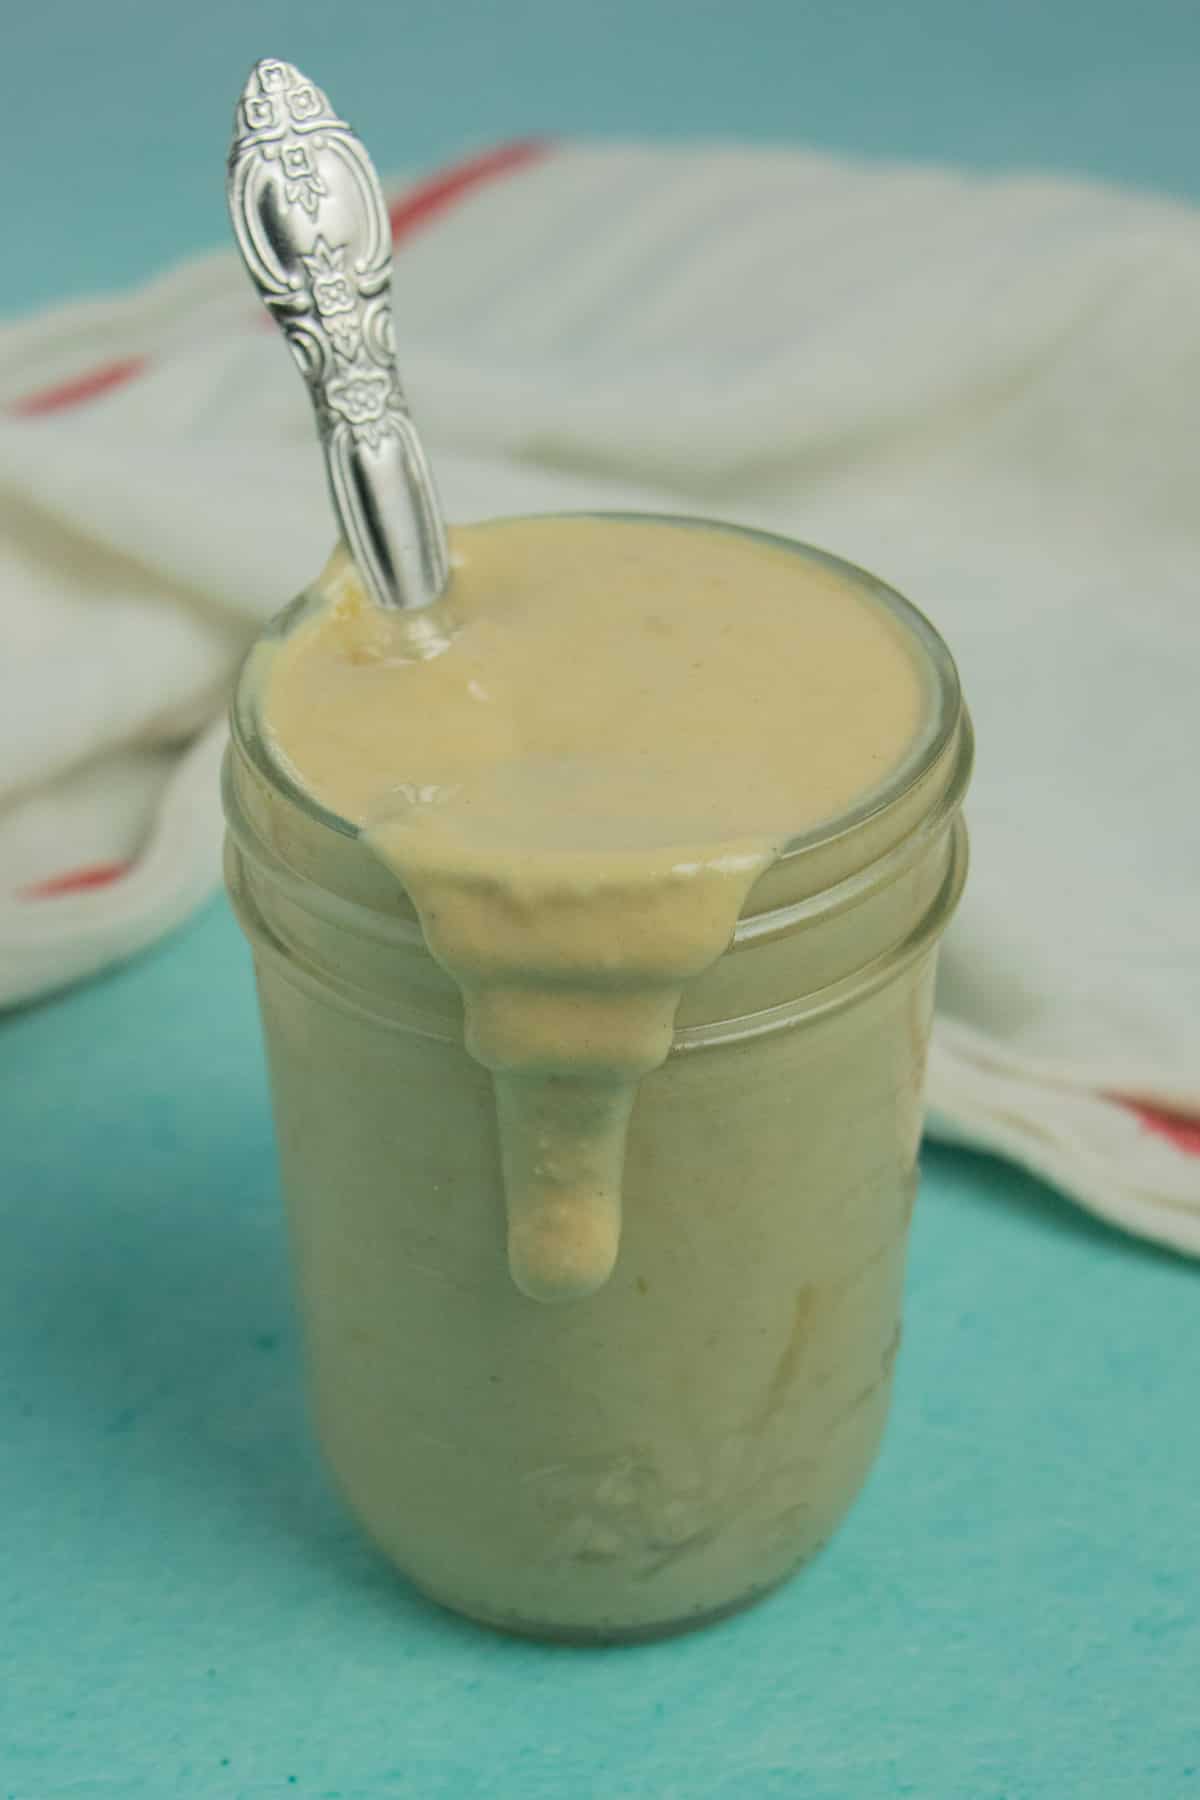 small, glass jar of creamy dressing with a spoon in it and some of the dressing dripping down the side of the jar